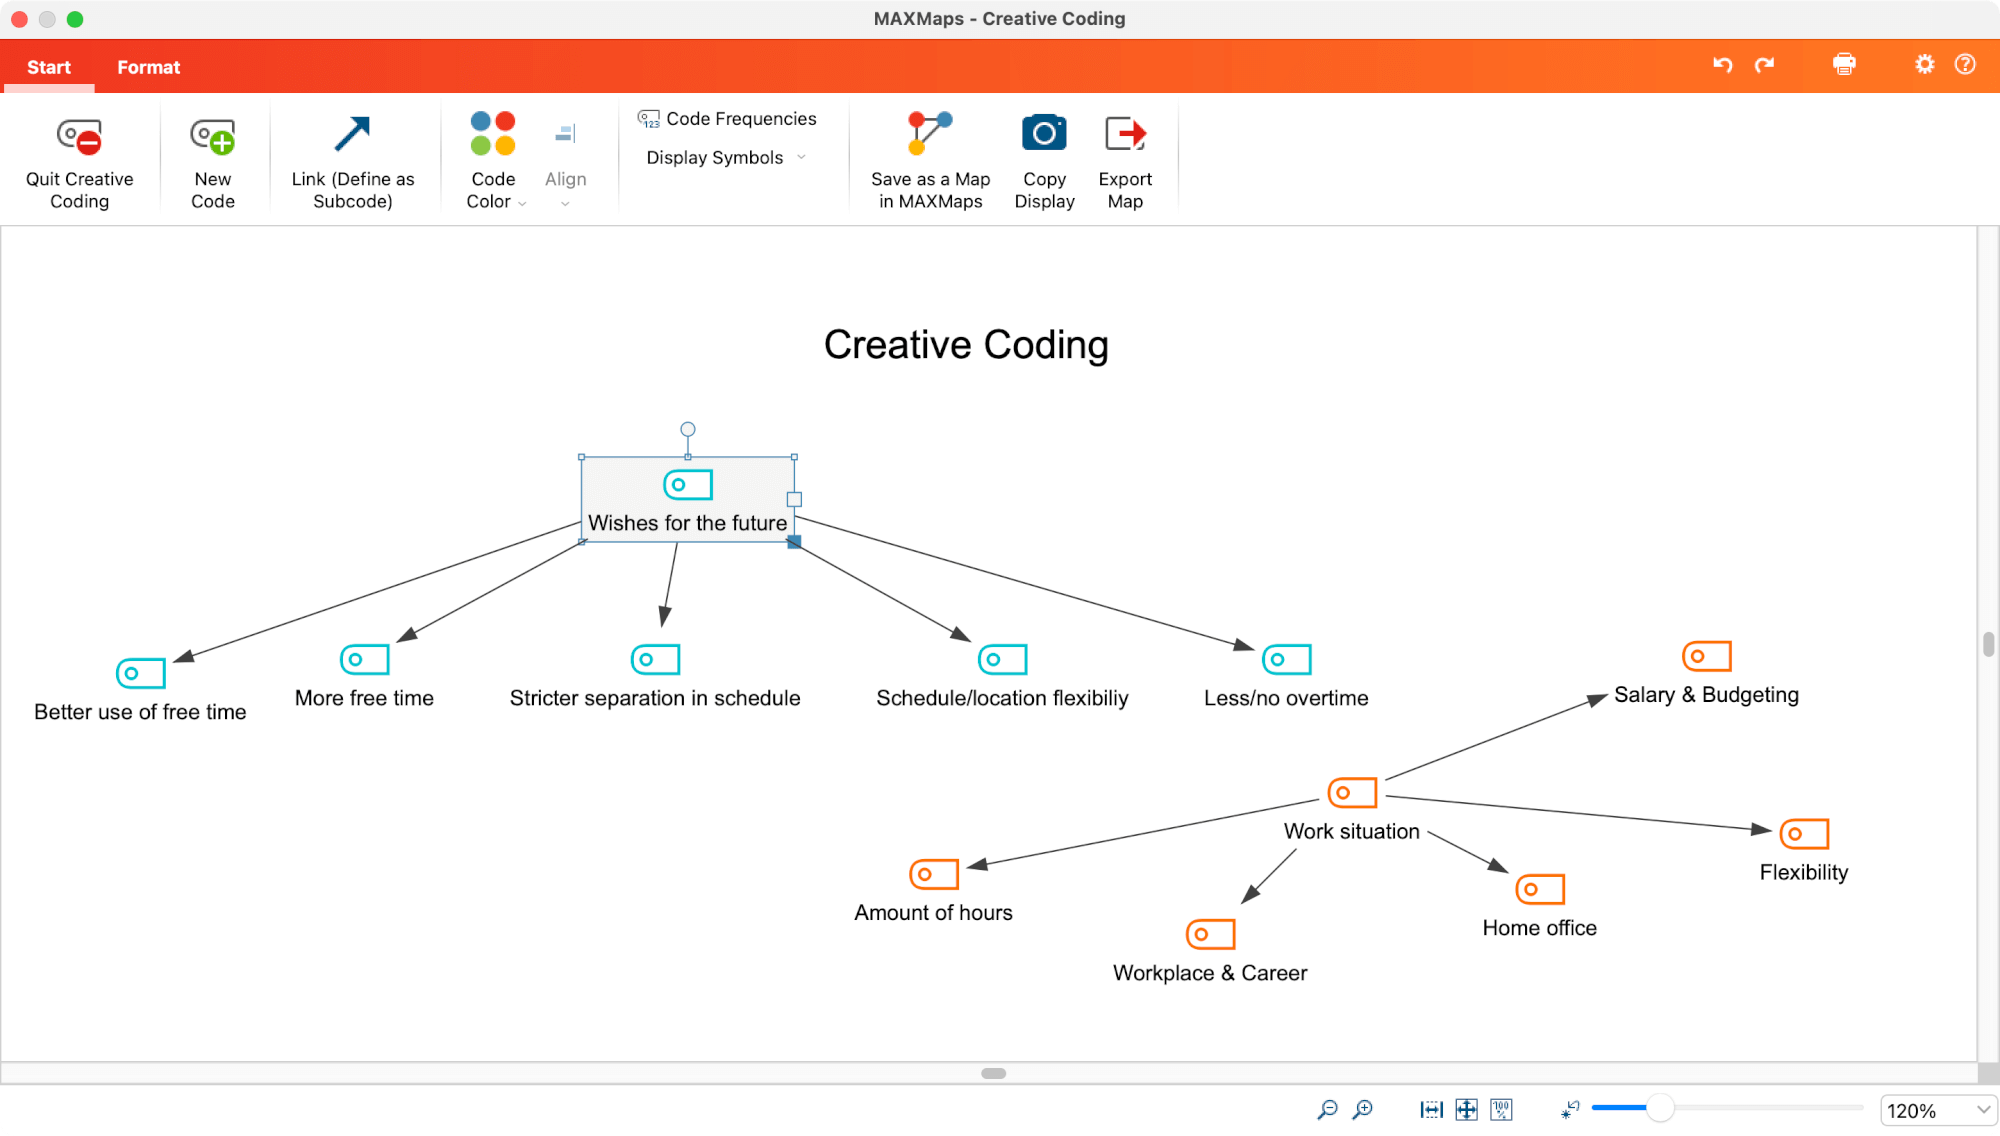 Organizing codes on the Creative Coding workspace